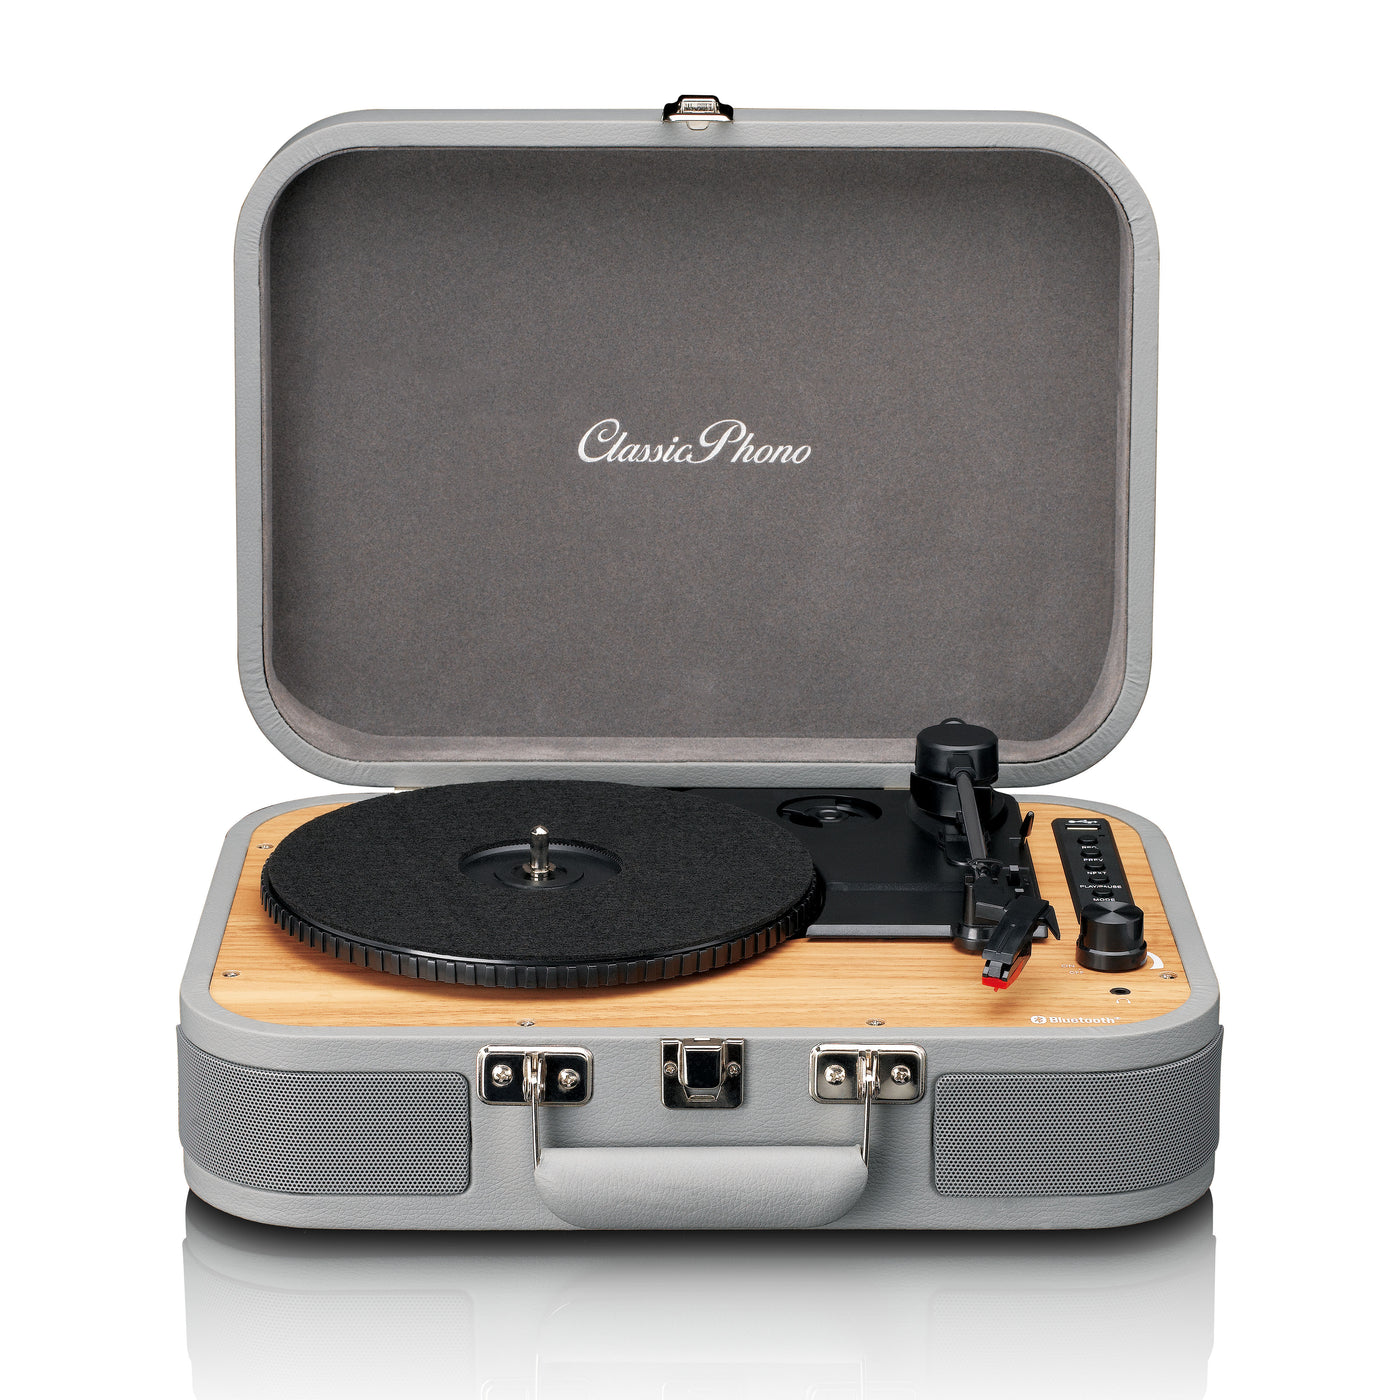 CLASSIC PHONO TT-116GY - Retro Bluetooth® turntable with built-in speakers - Grey